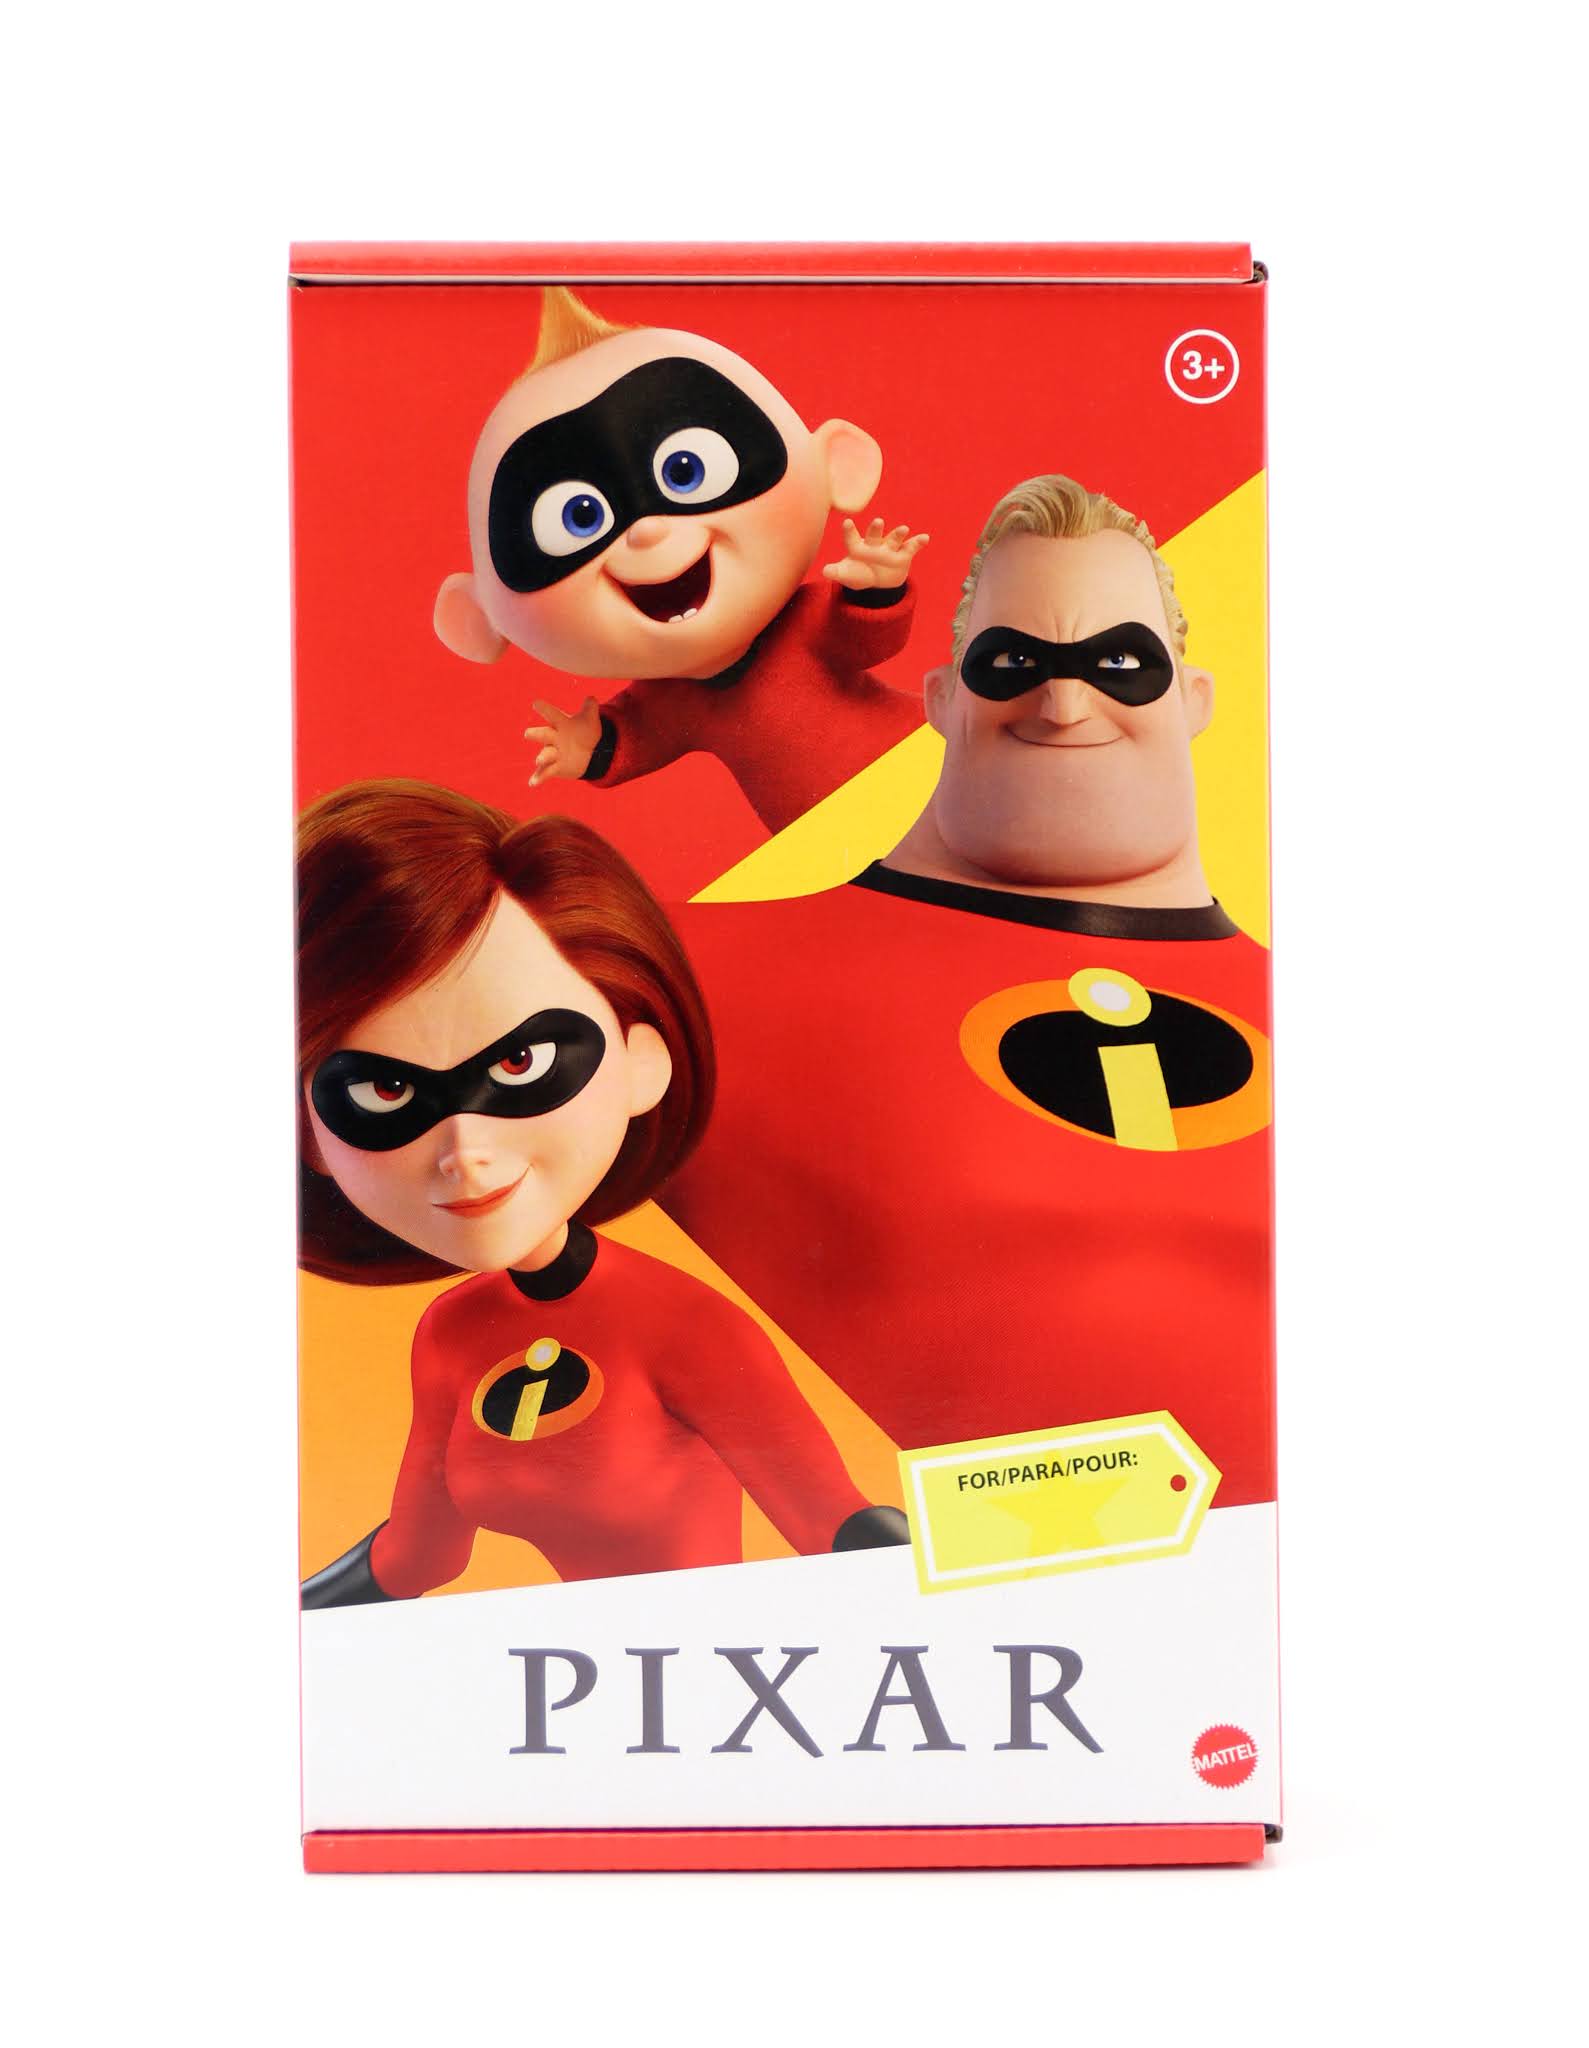 Mr. Incredible - Pixar The Incredibles Action Figure Disney Store Toys  (Sub-Standard Packaging)